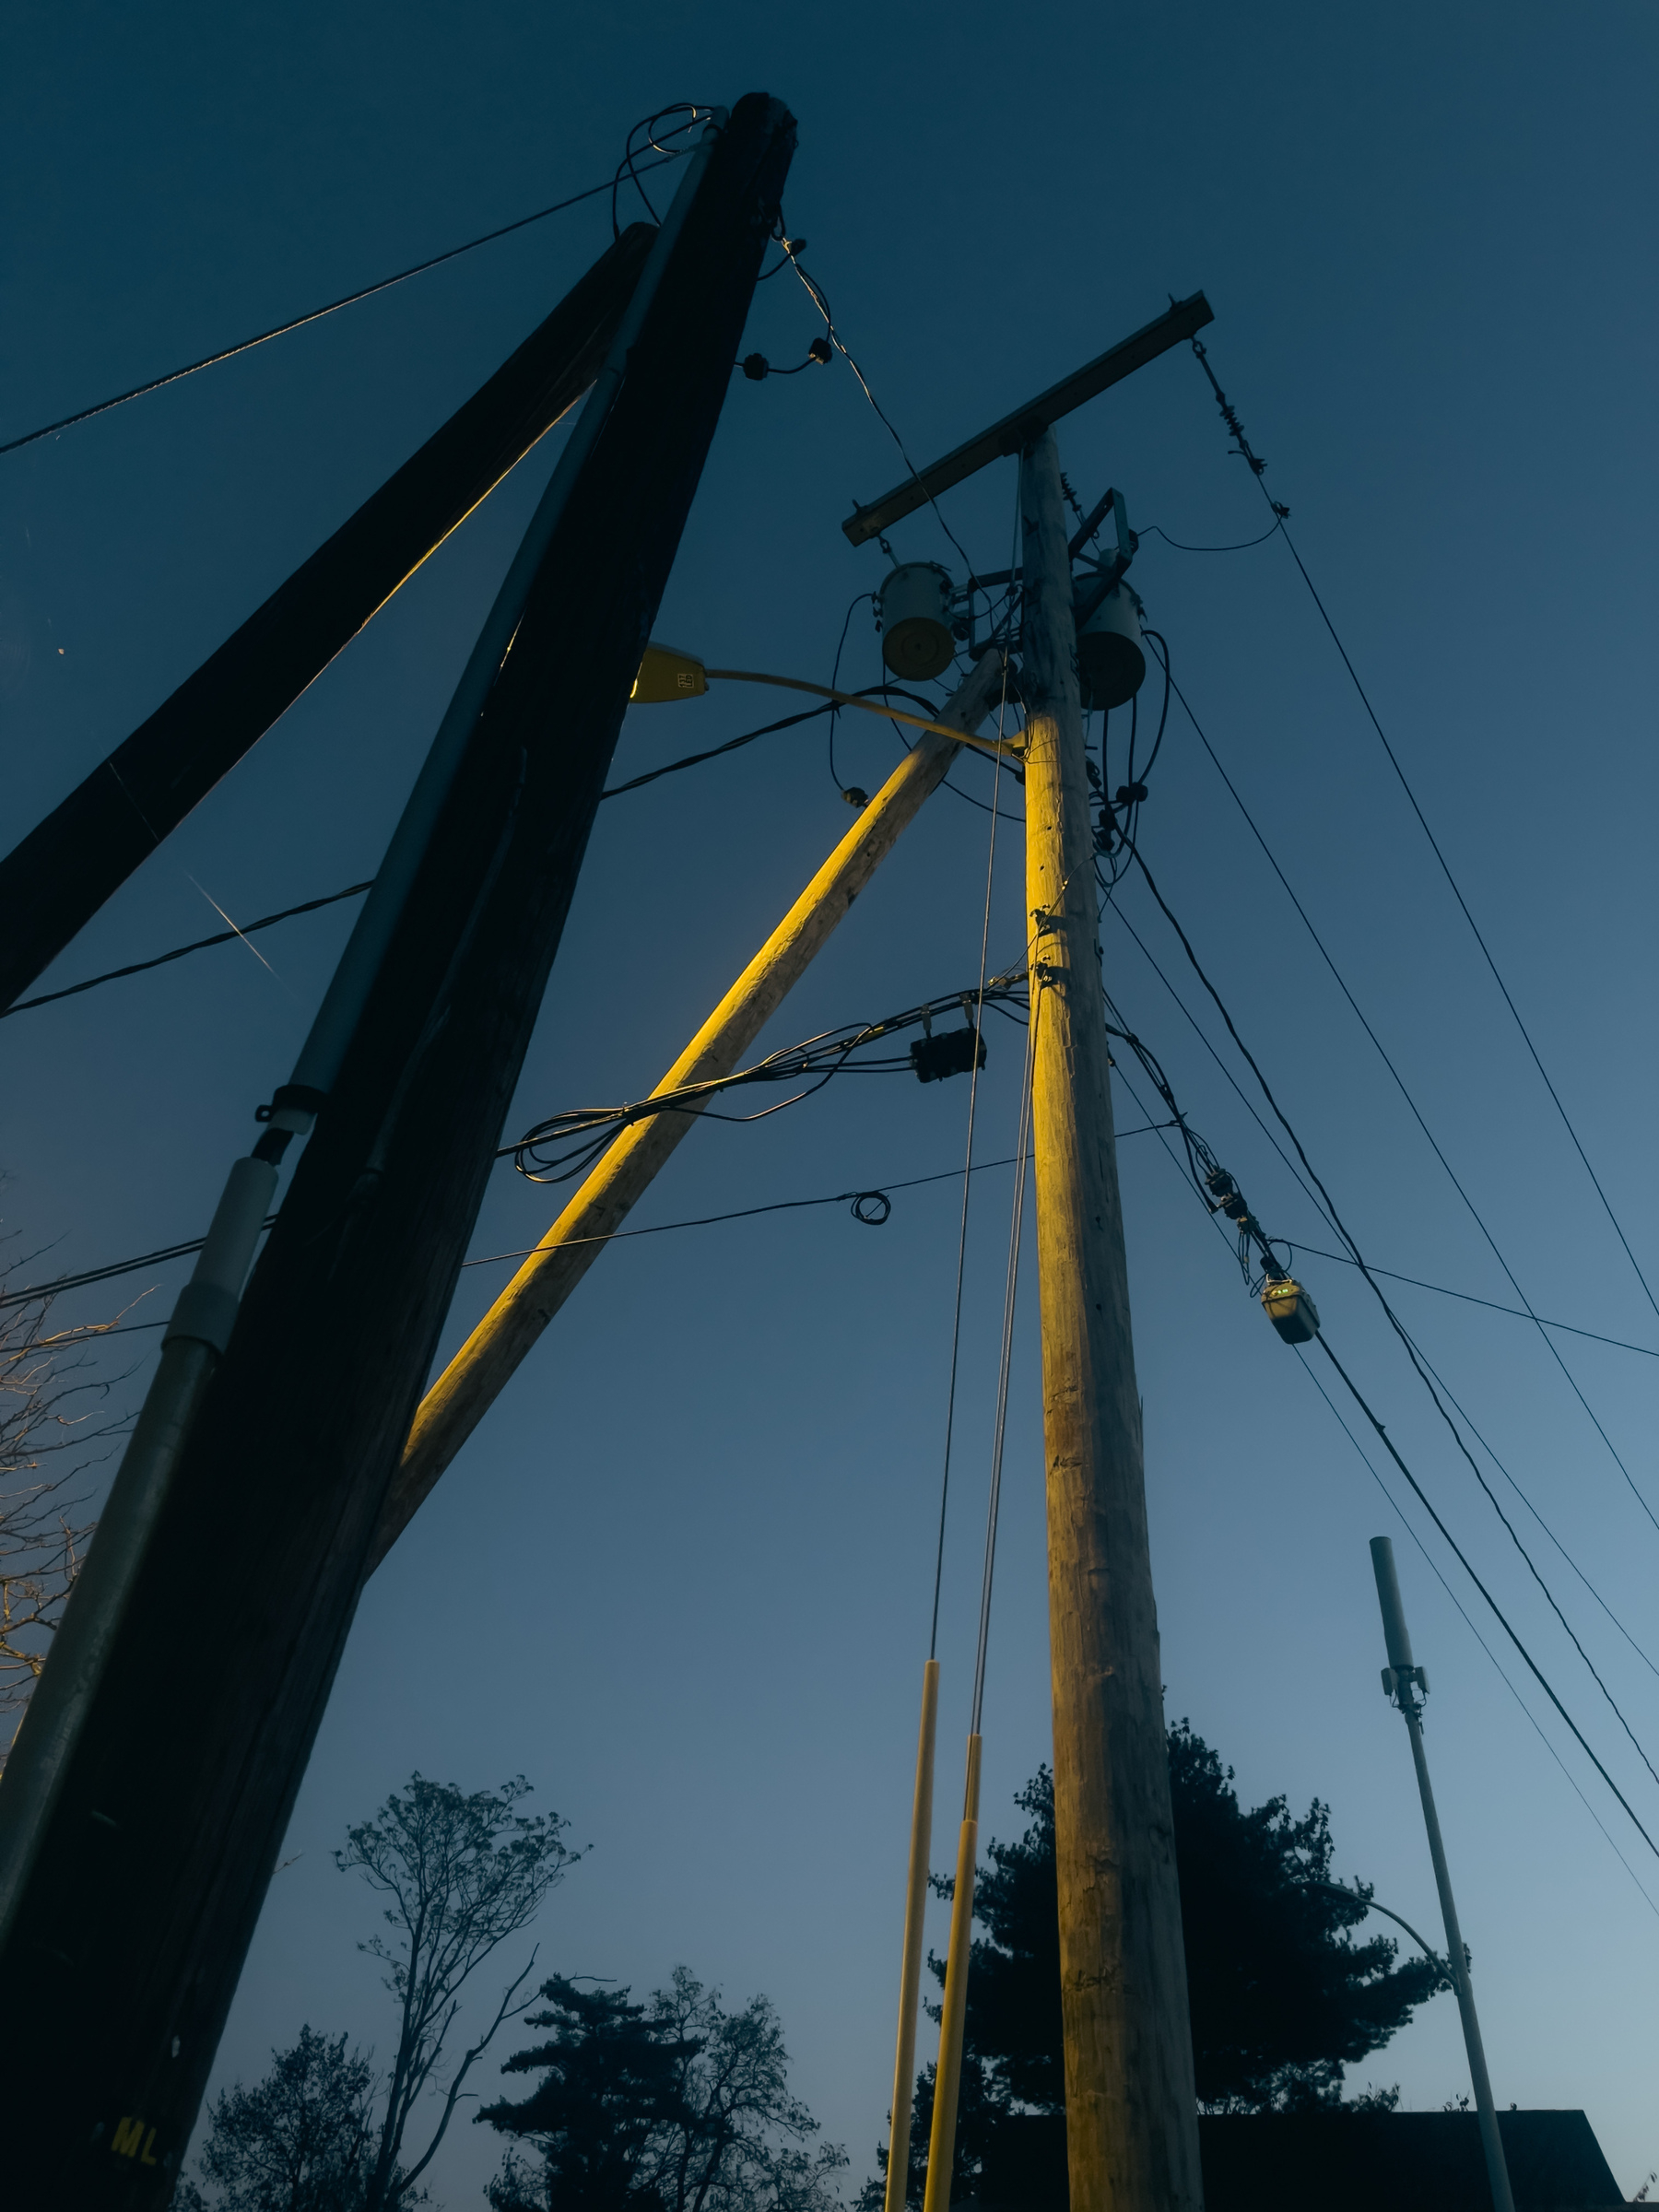 Utility poles and wires against a dawn sky.